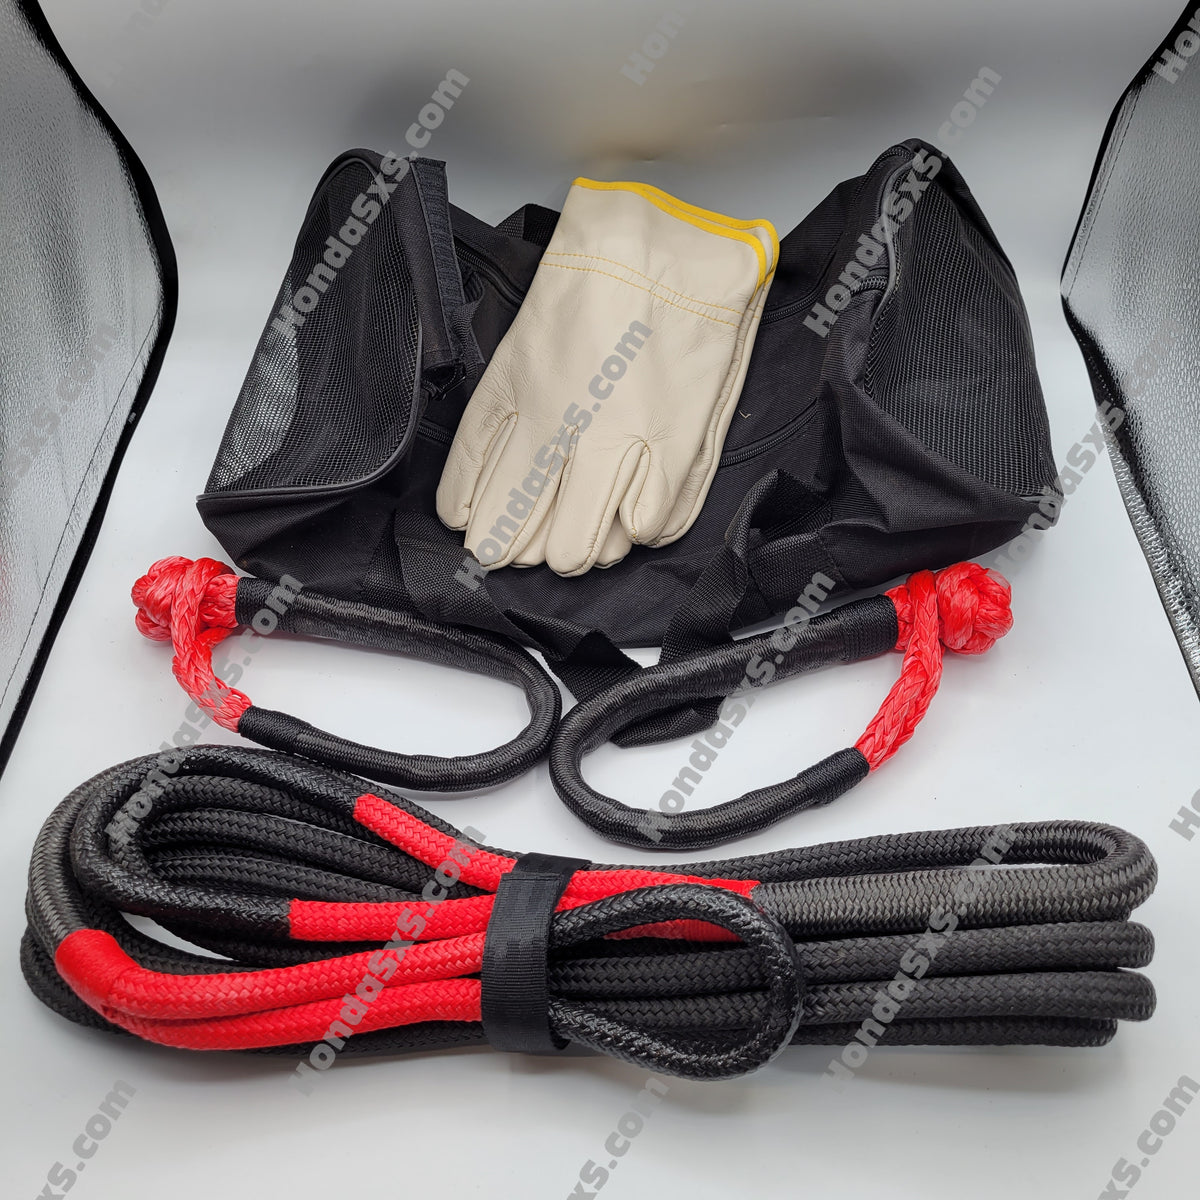 Kinetic Jerk Rope Recovery Kit, tow rope - 20 feet